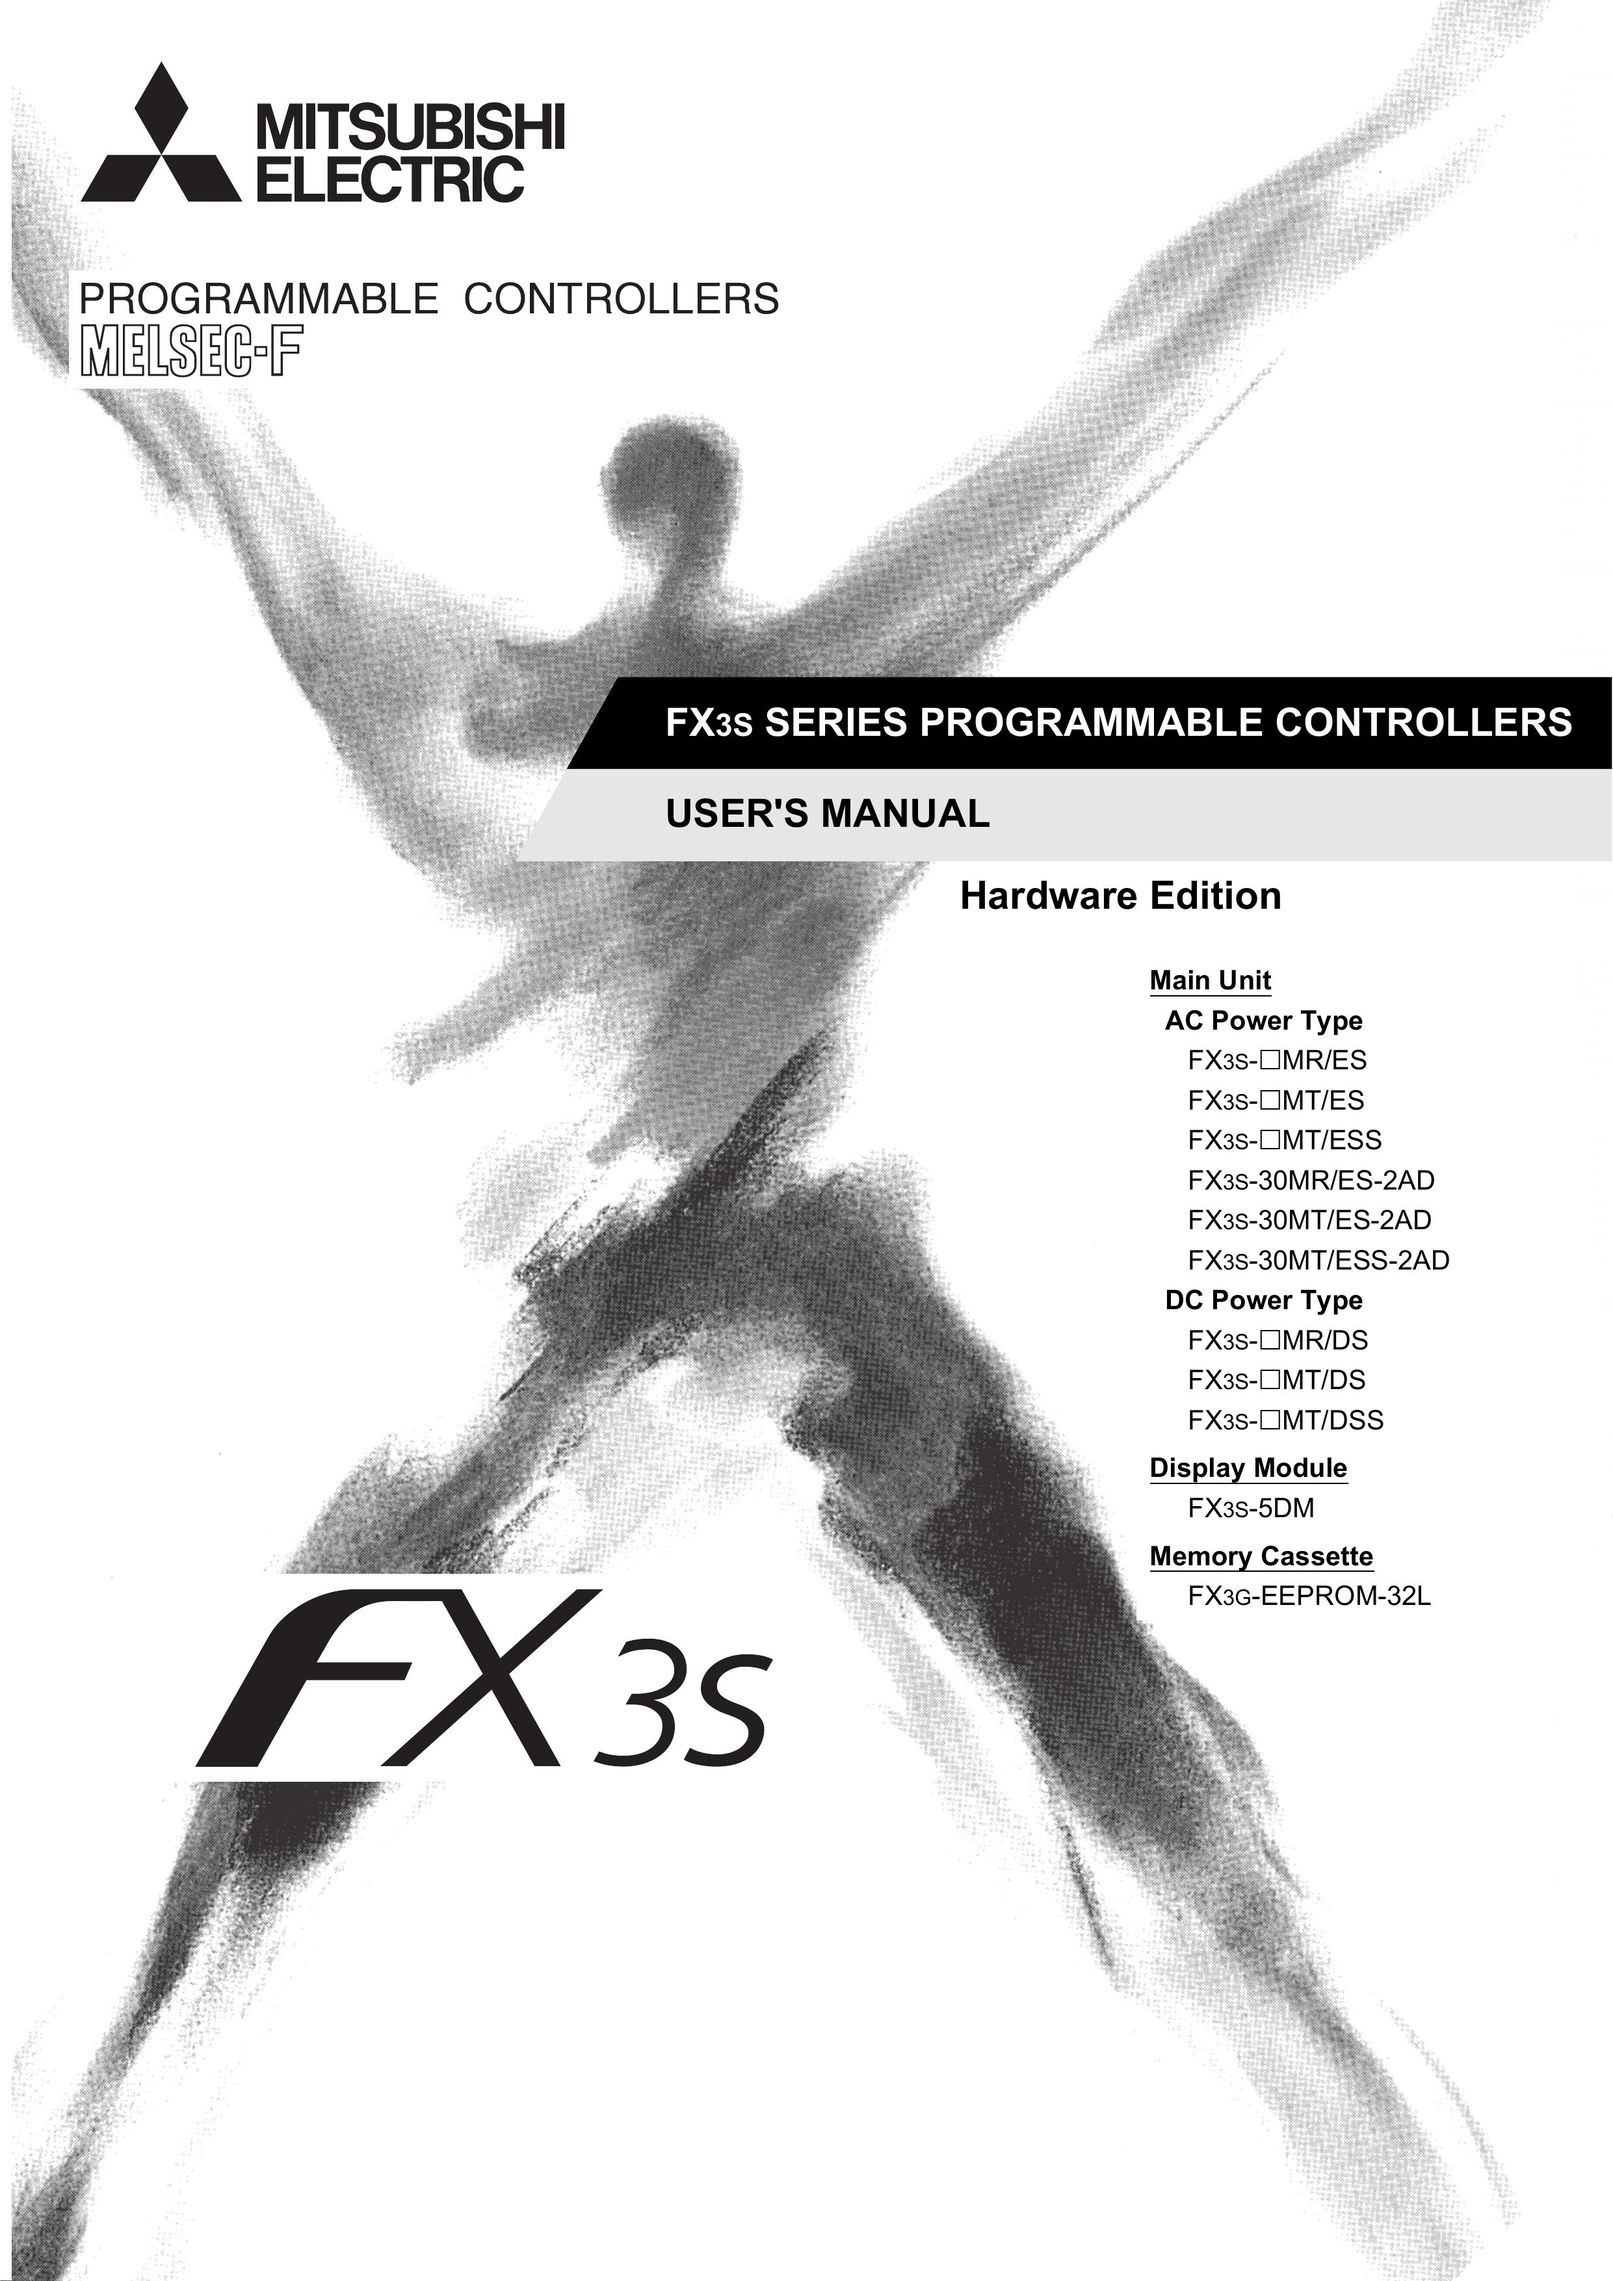 Mitsubishi Electronics FX3S-MT/DSS Home Theater Server User Manual